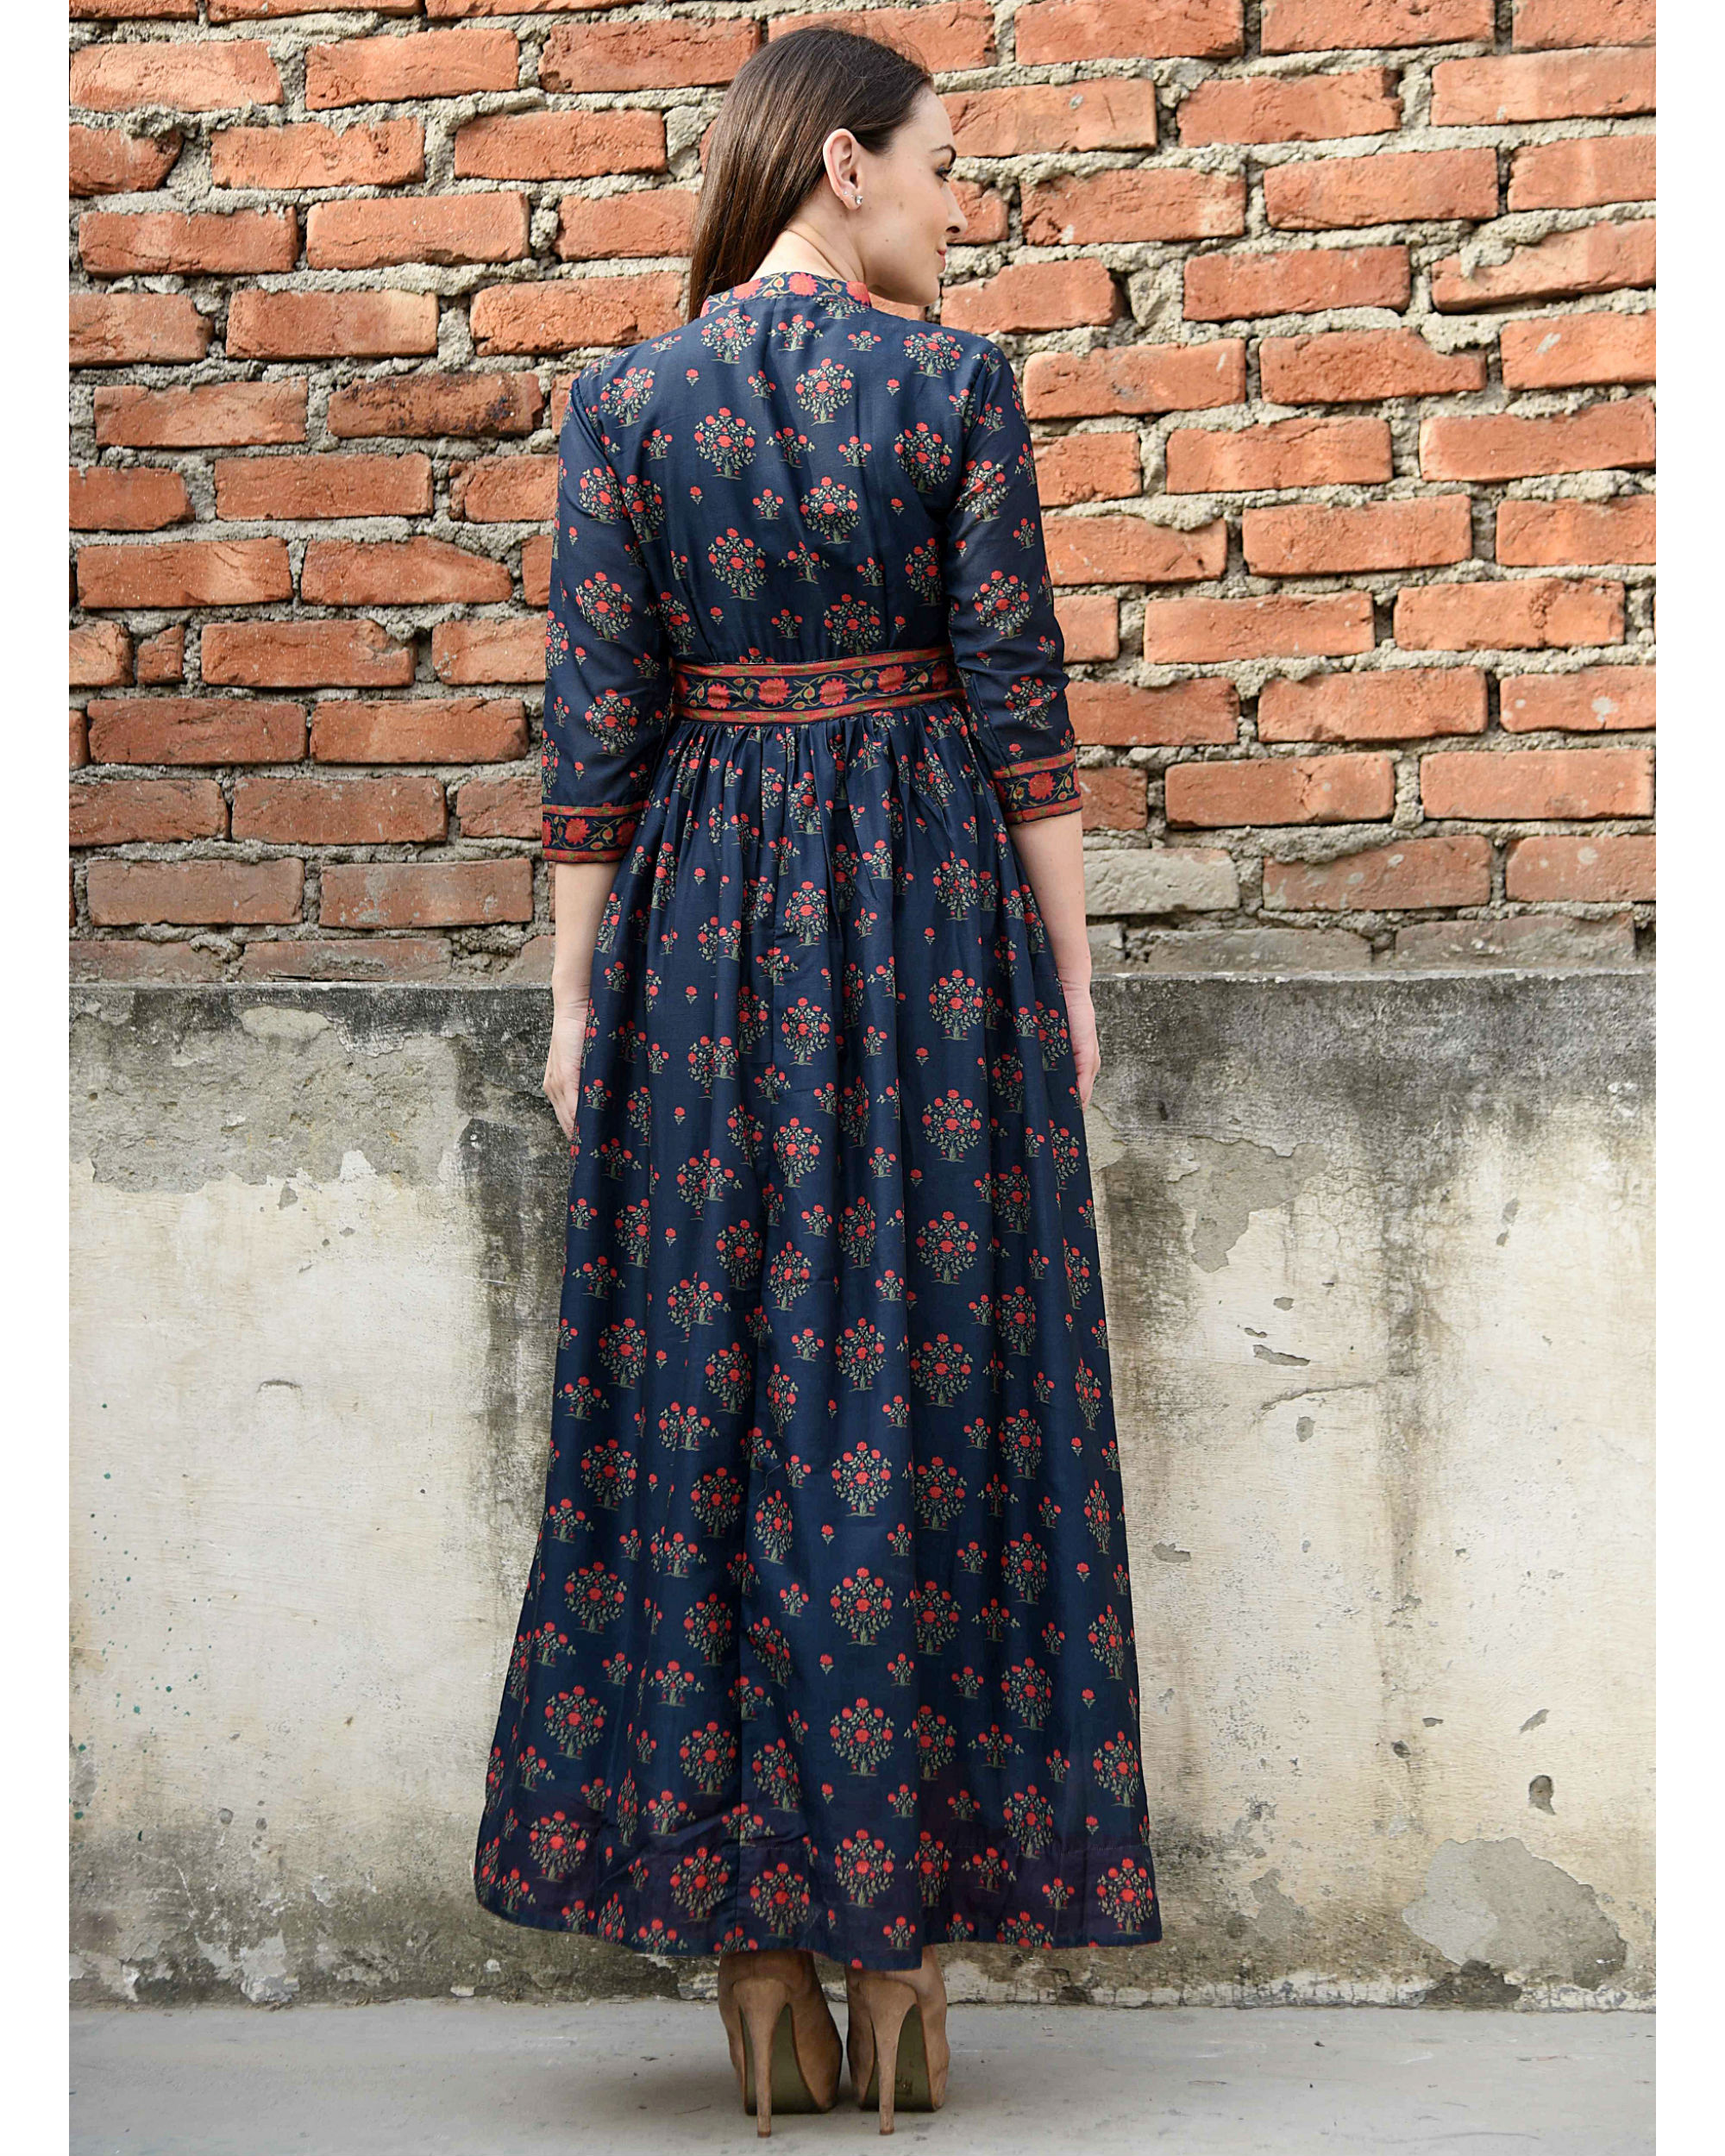 Prussian blue and red cape by Desi Doree | The Secret Label